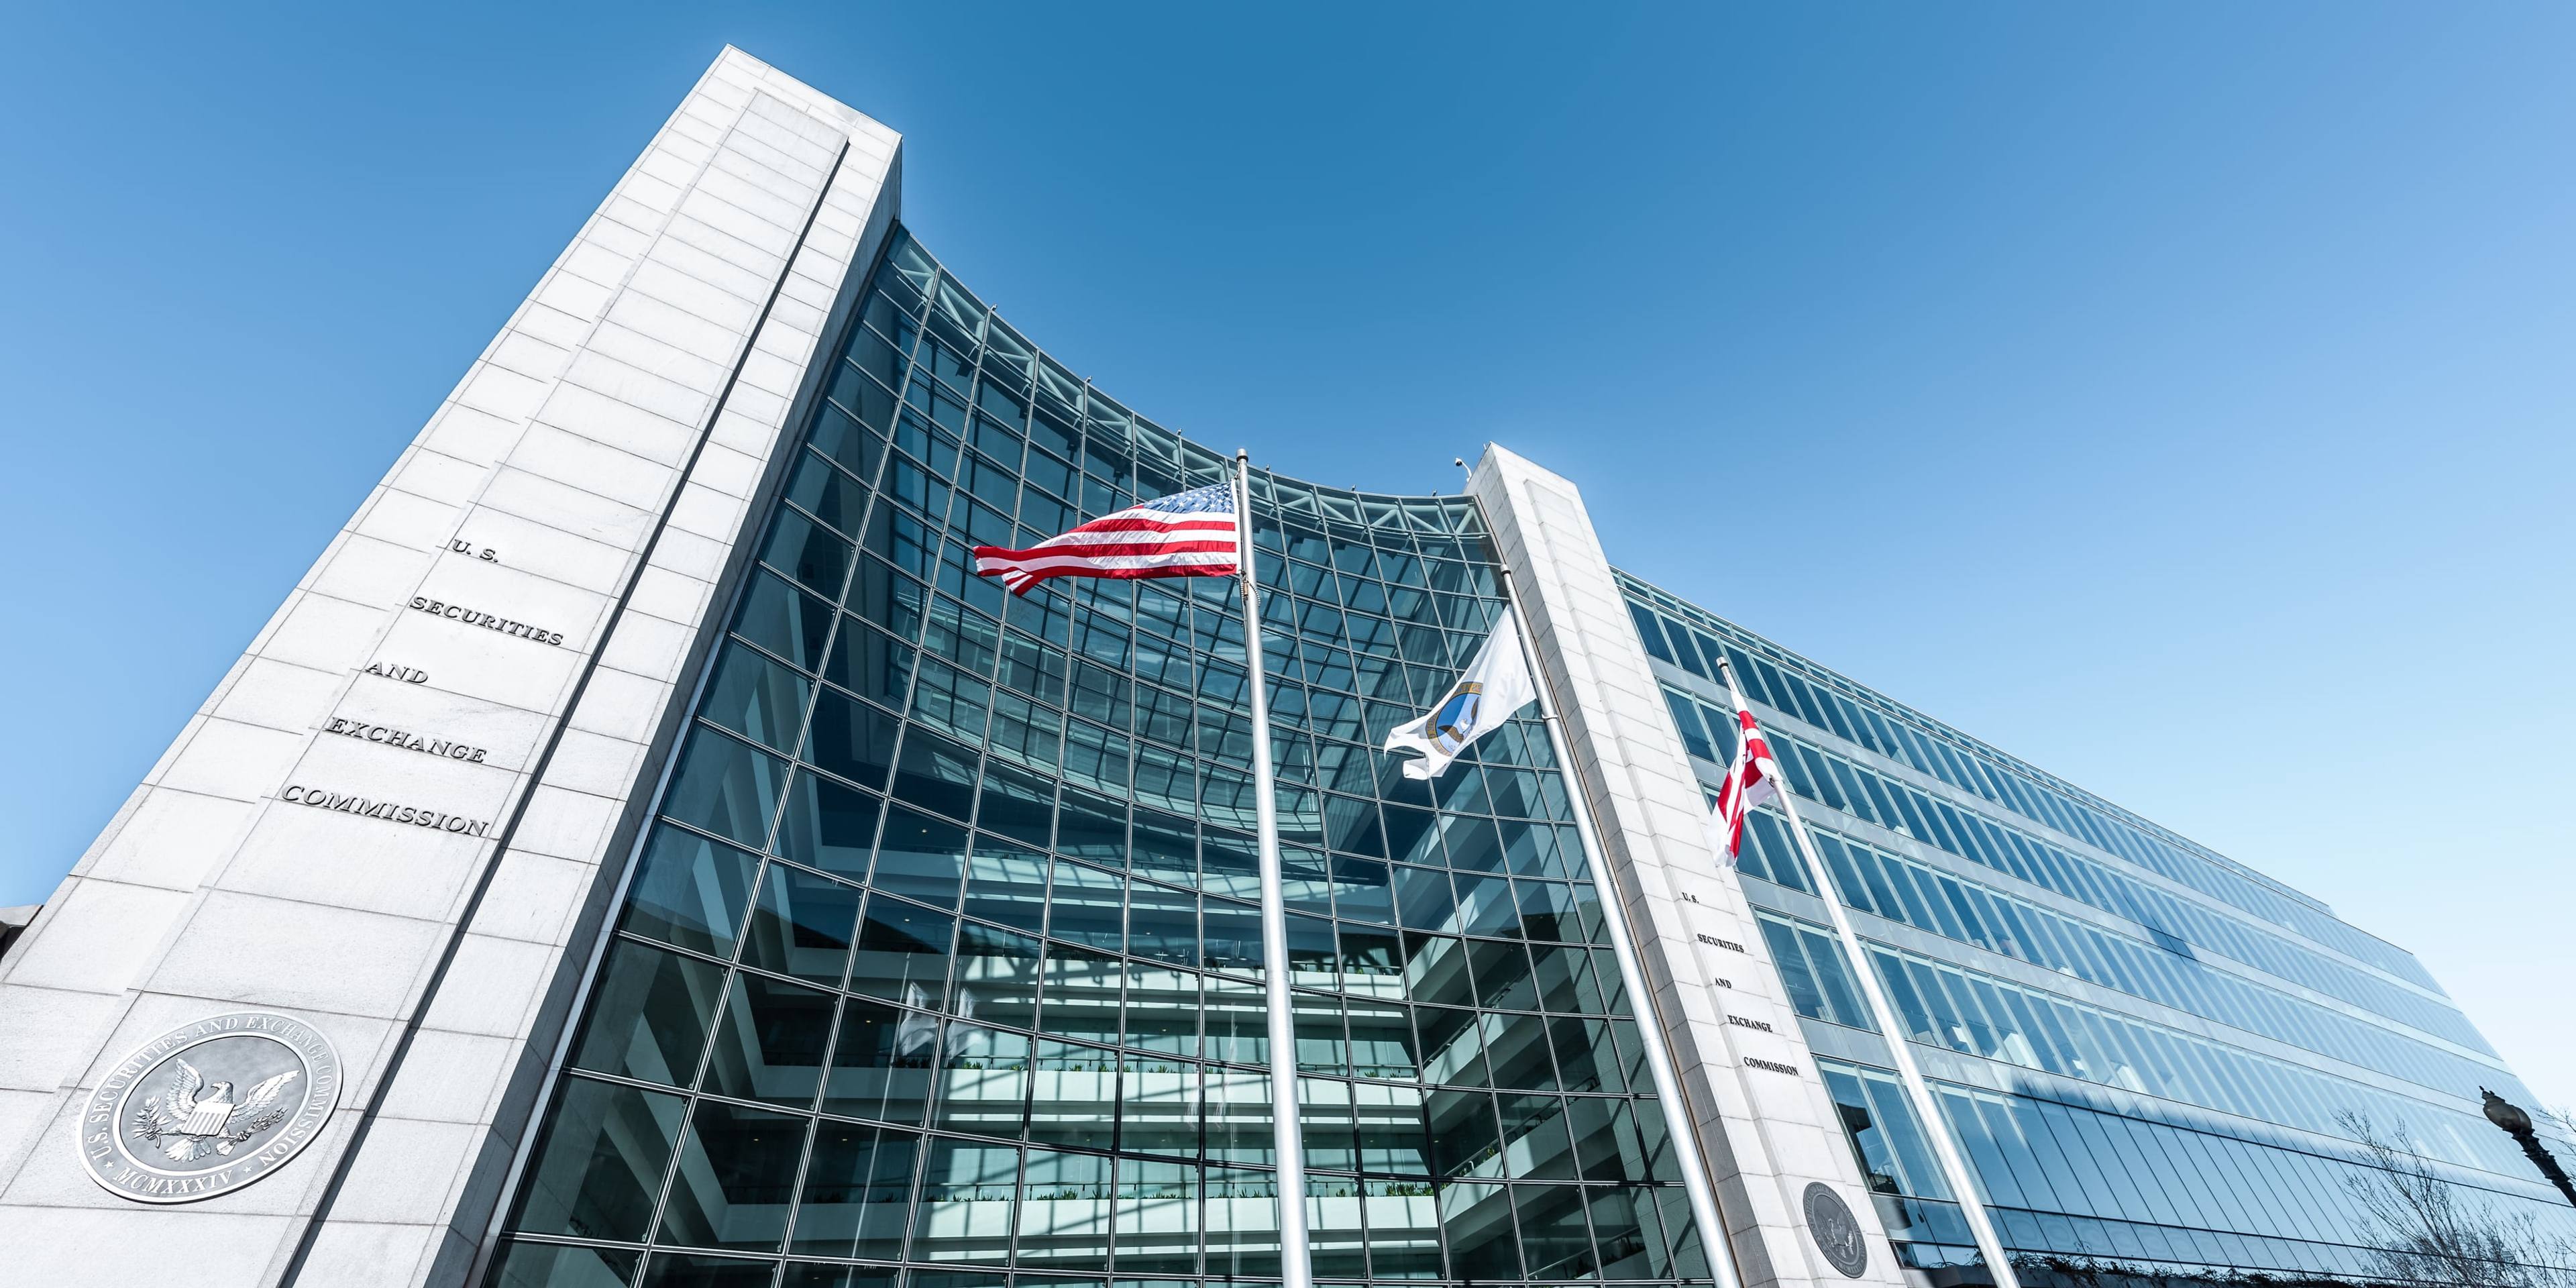 Wide-angle photograph of the glass headquarters of the SEC in Washington